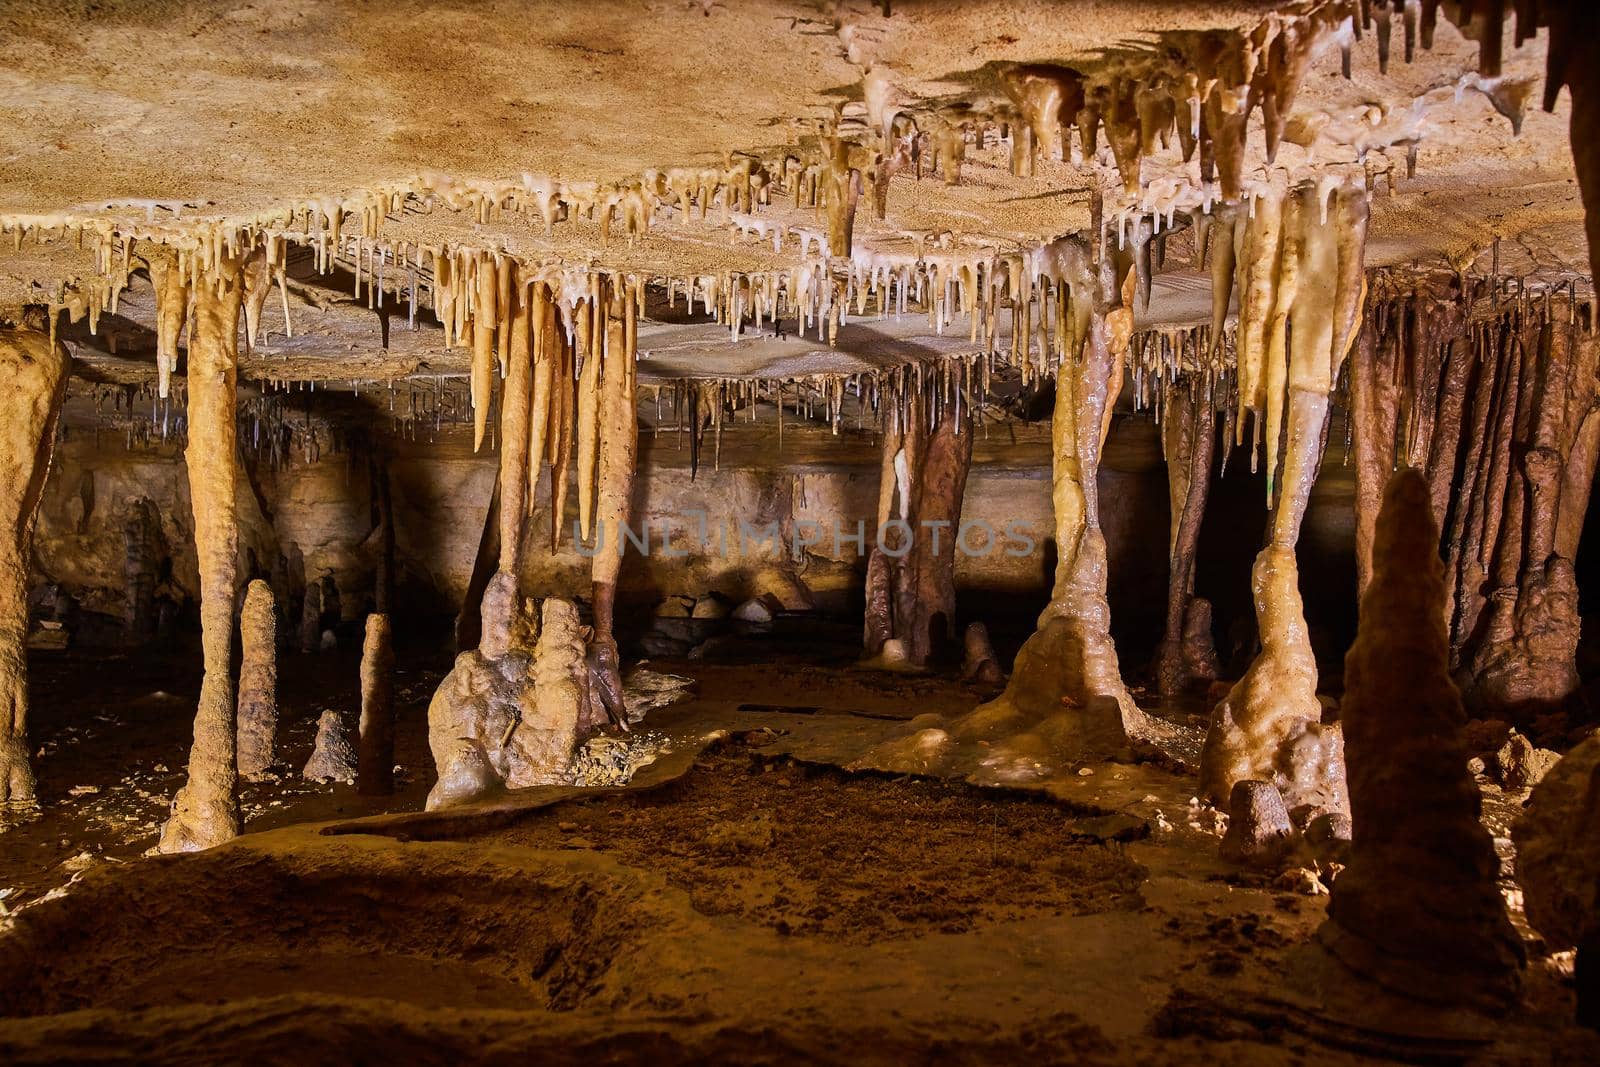 Image of Formations of stalagmites and stalactites in cave with narrow walking space